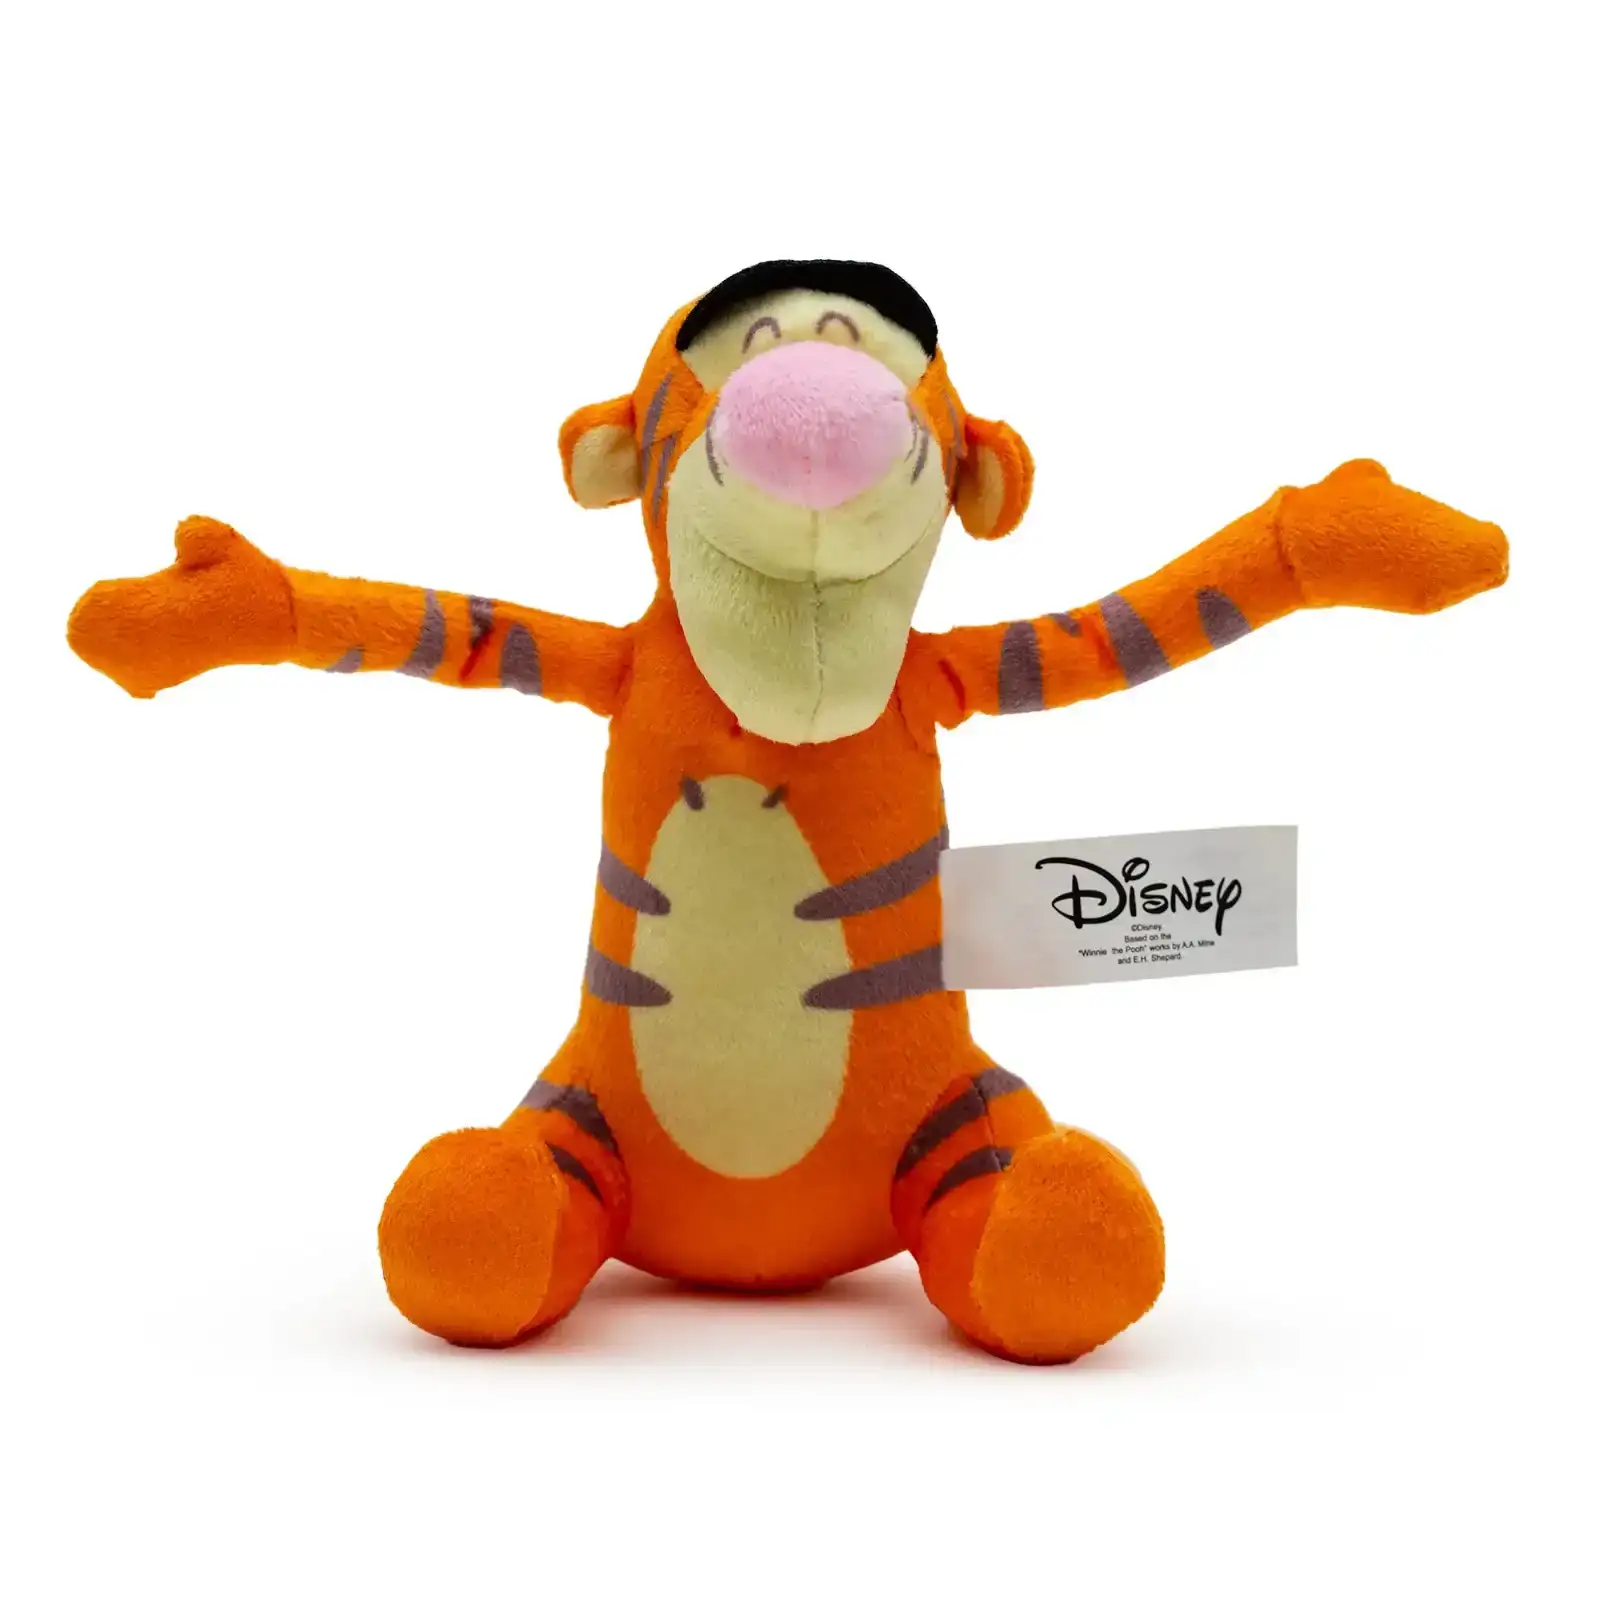 Image of Dog Toy Squeaker Plush - Winnie the Pooh Tiggers Arms Up Sitting Pose